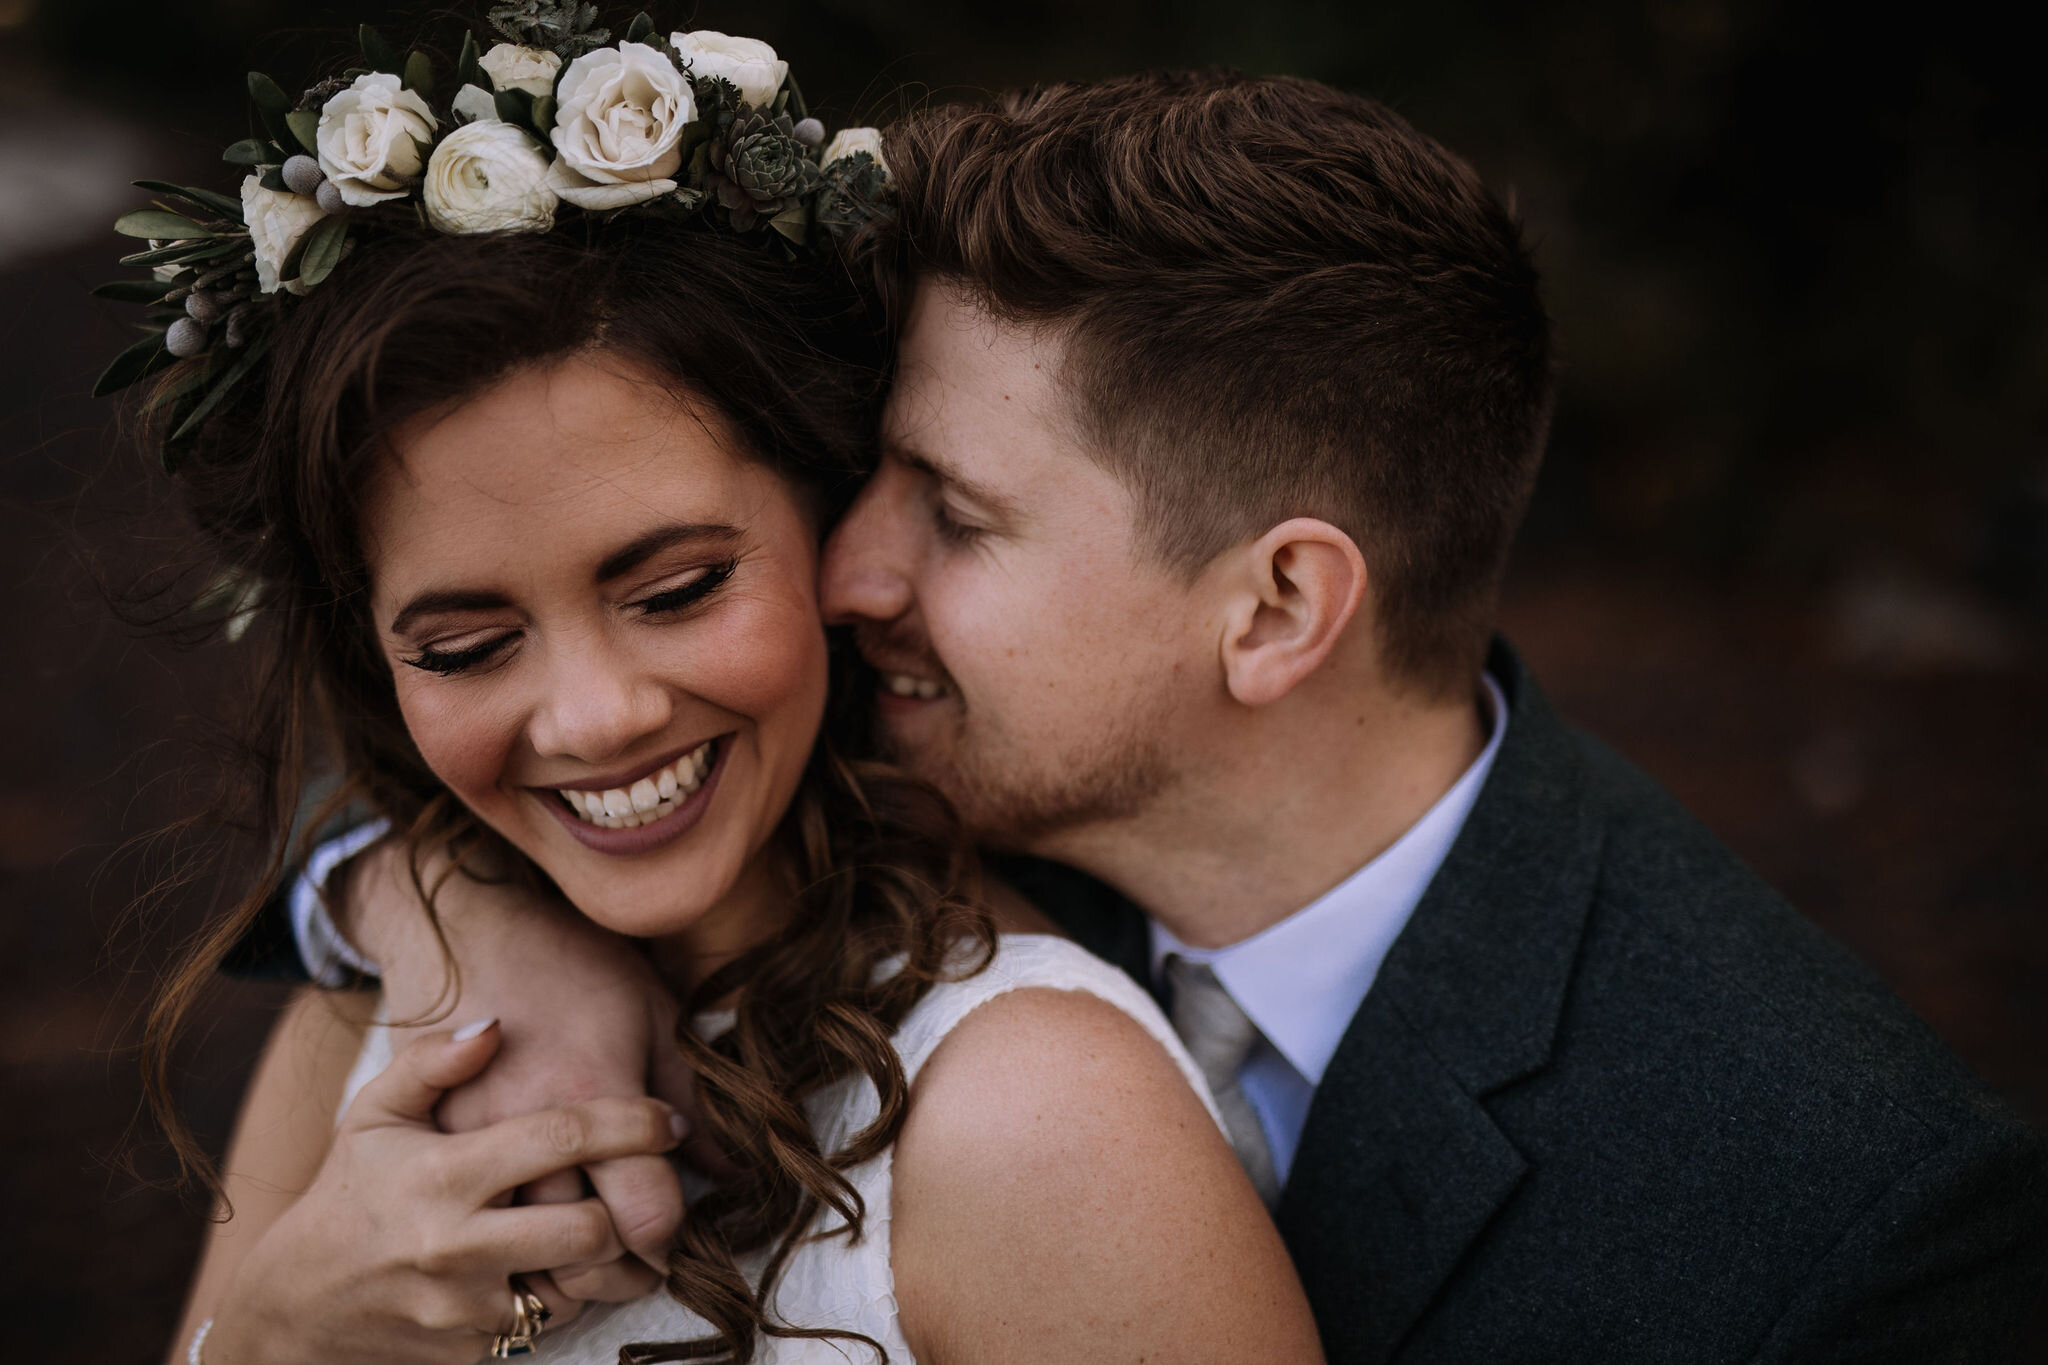 pacific-engagements-lake-crescent-lodge-wedding-bride-wearing-flower-crown-bridal-portraits-bride-and-groom-portraits